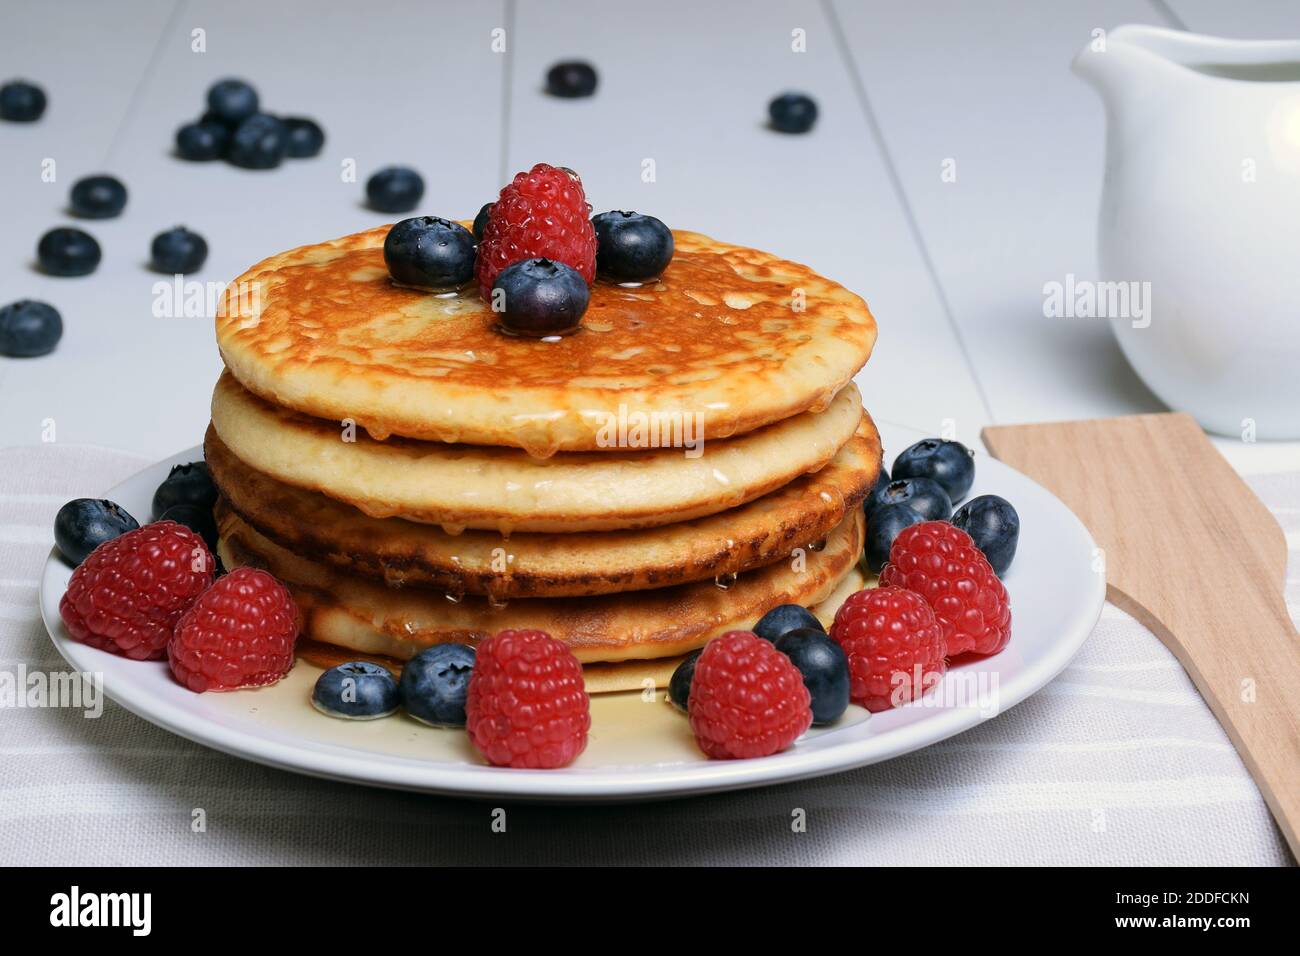 Pancakes with maple syrup, blueberries and raspberries on white wooden table, porcelain jug and wooden spoon. Stock Photo